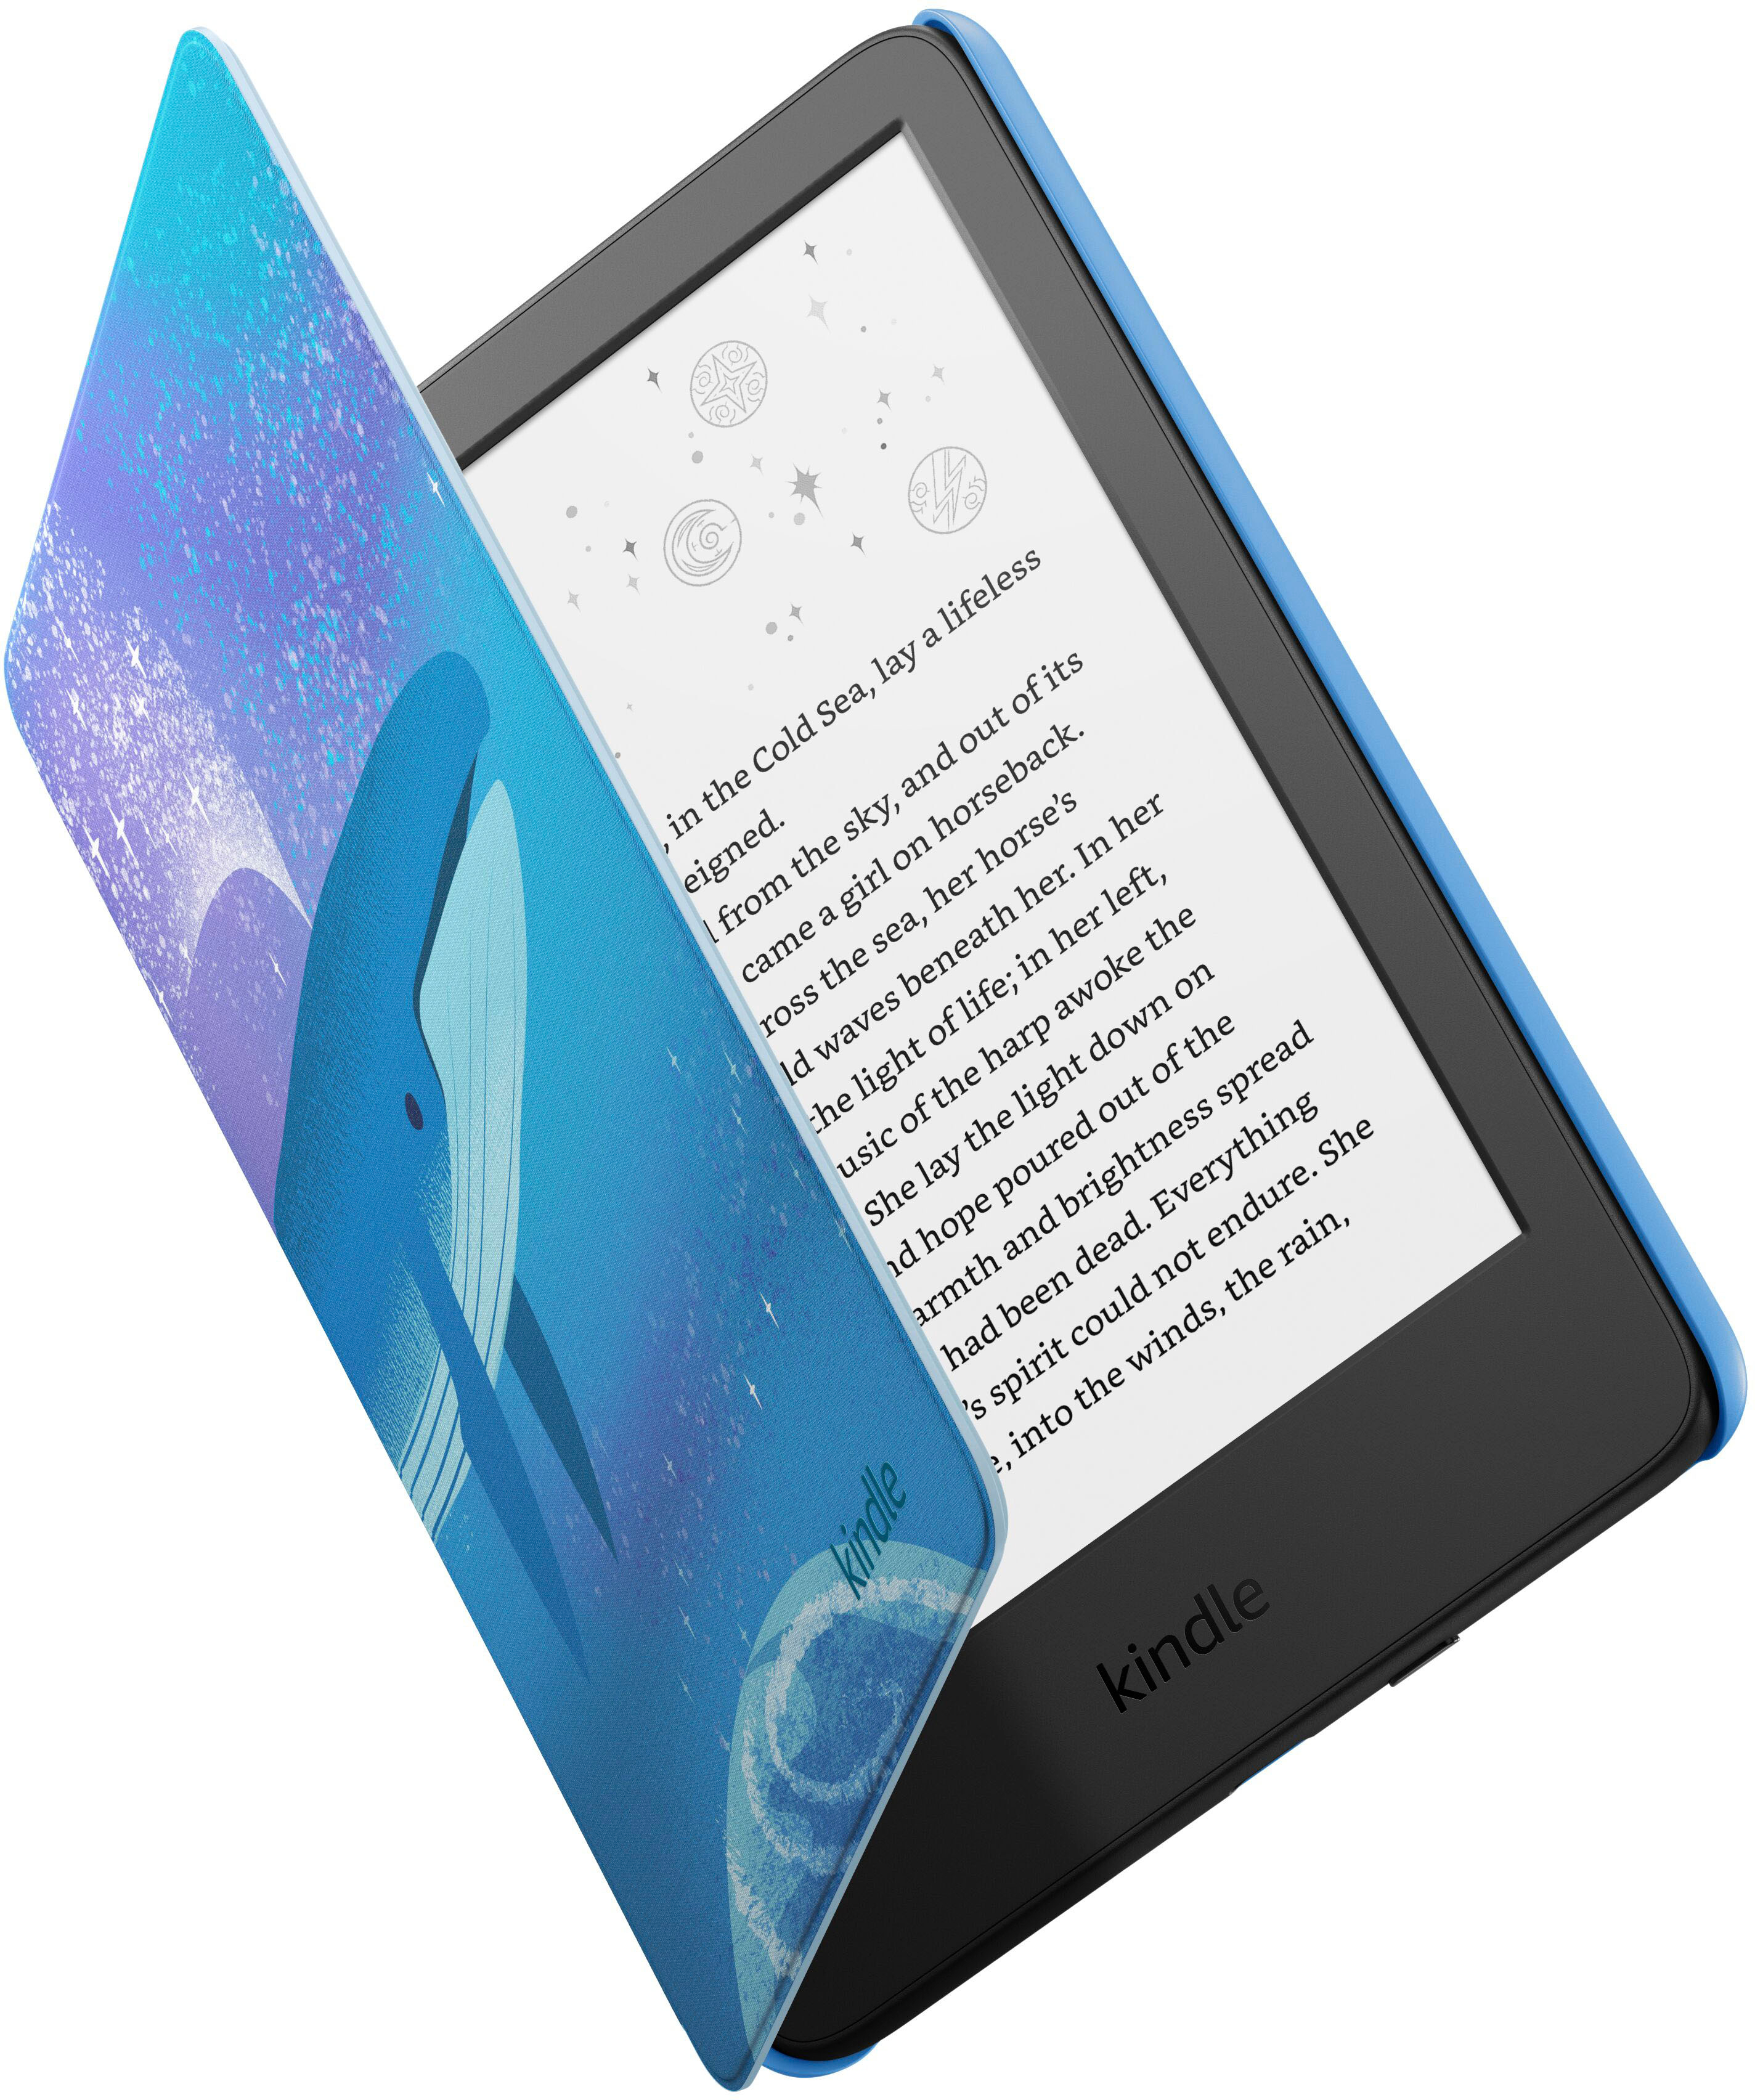 Kindle – The lightest and most compact Kindle, now with a 6” 300 ppi  high-resolution display, and 2x the storage – Black